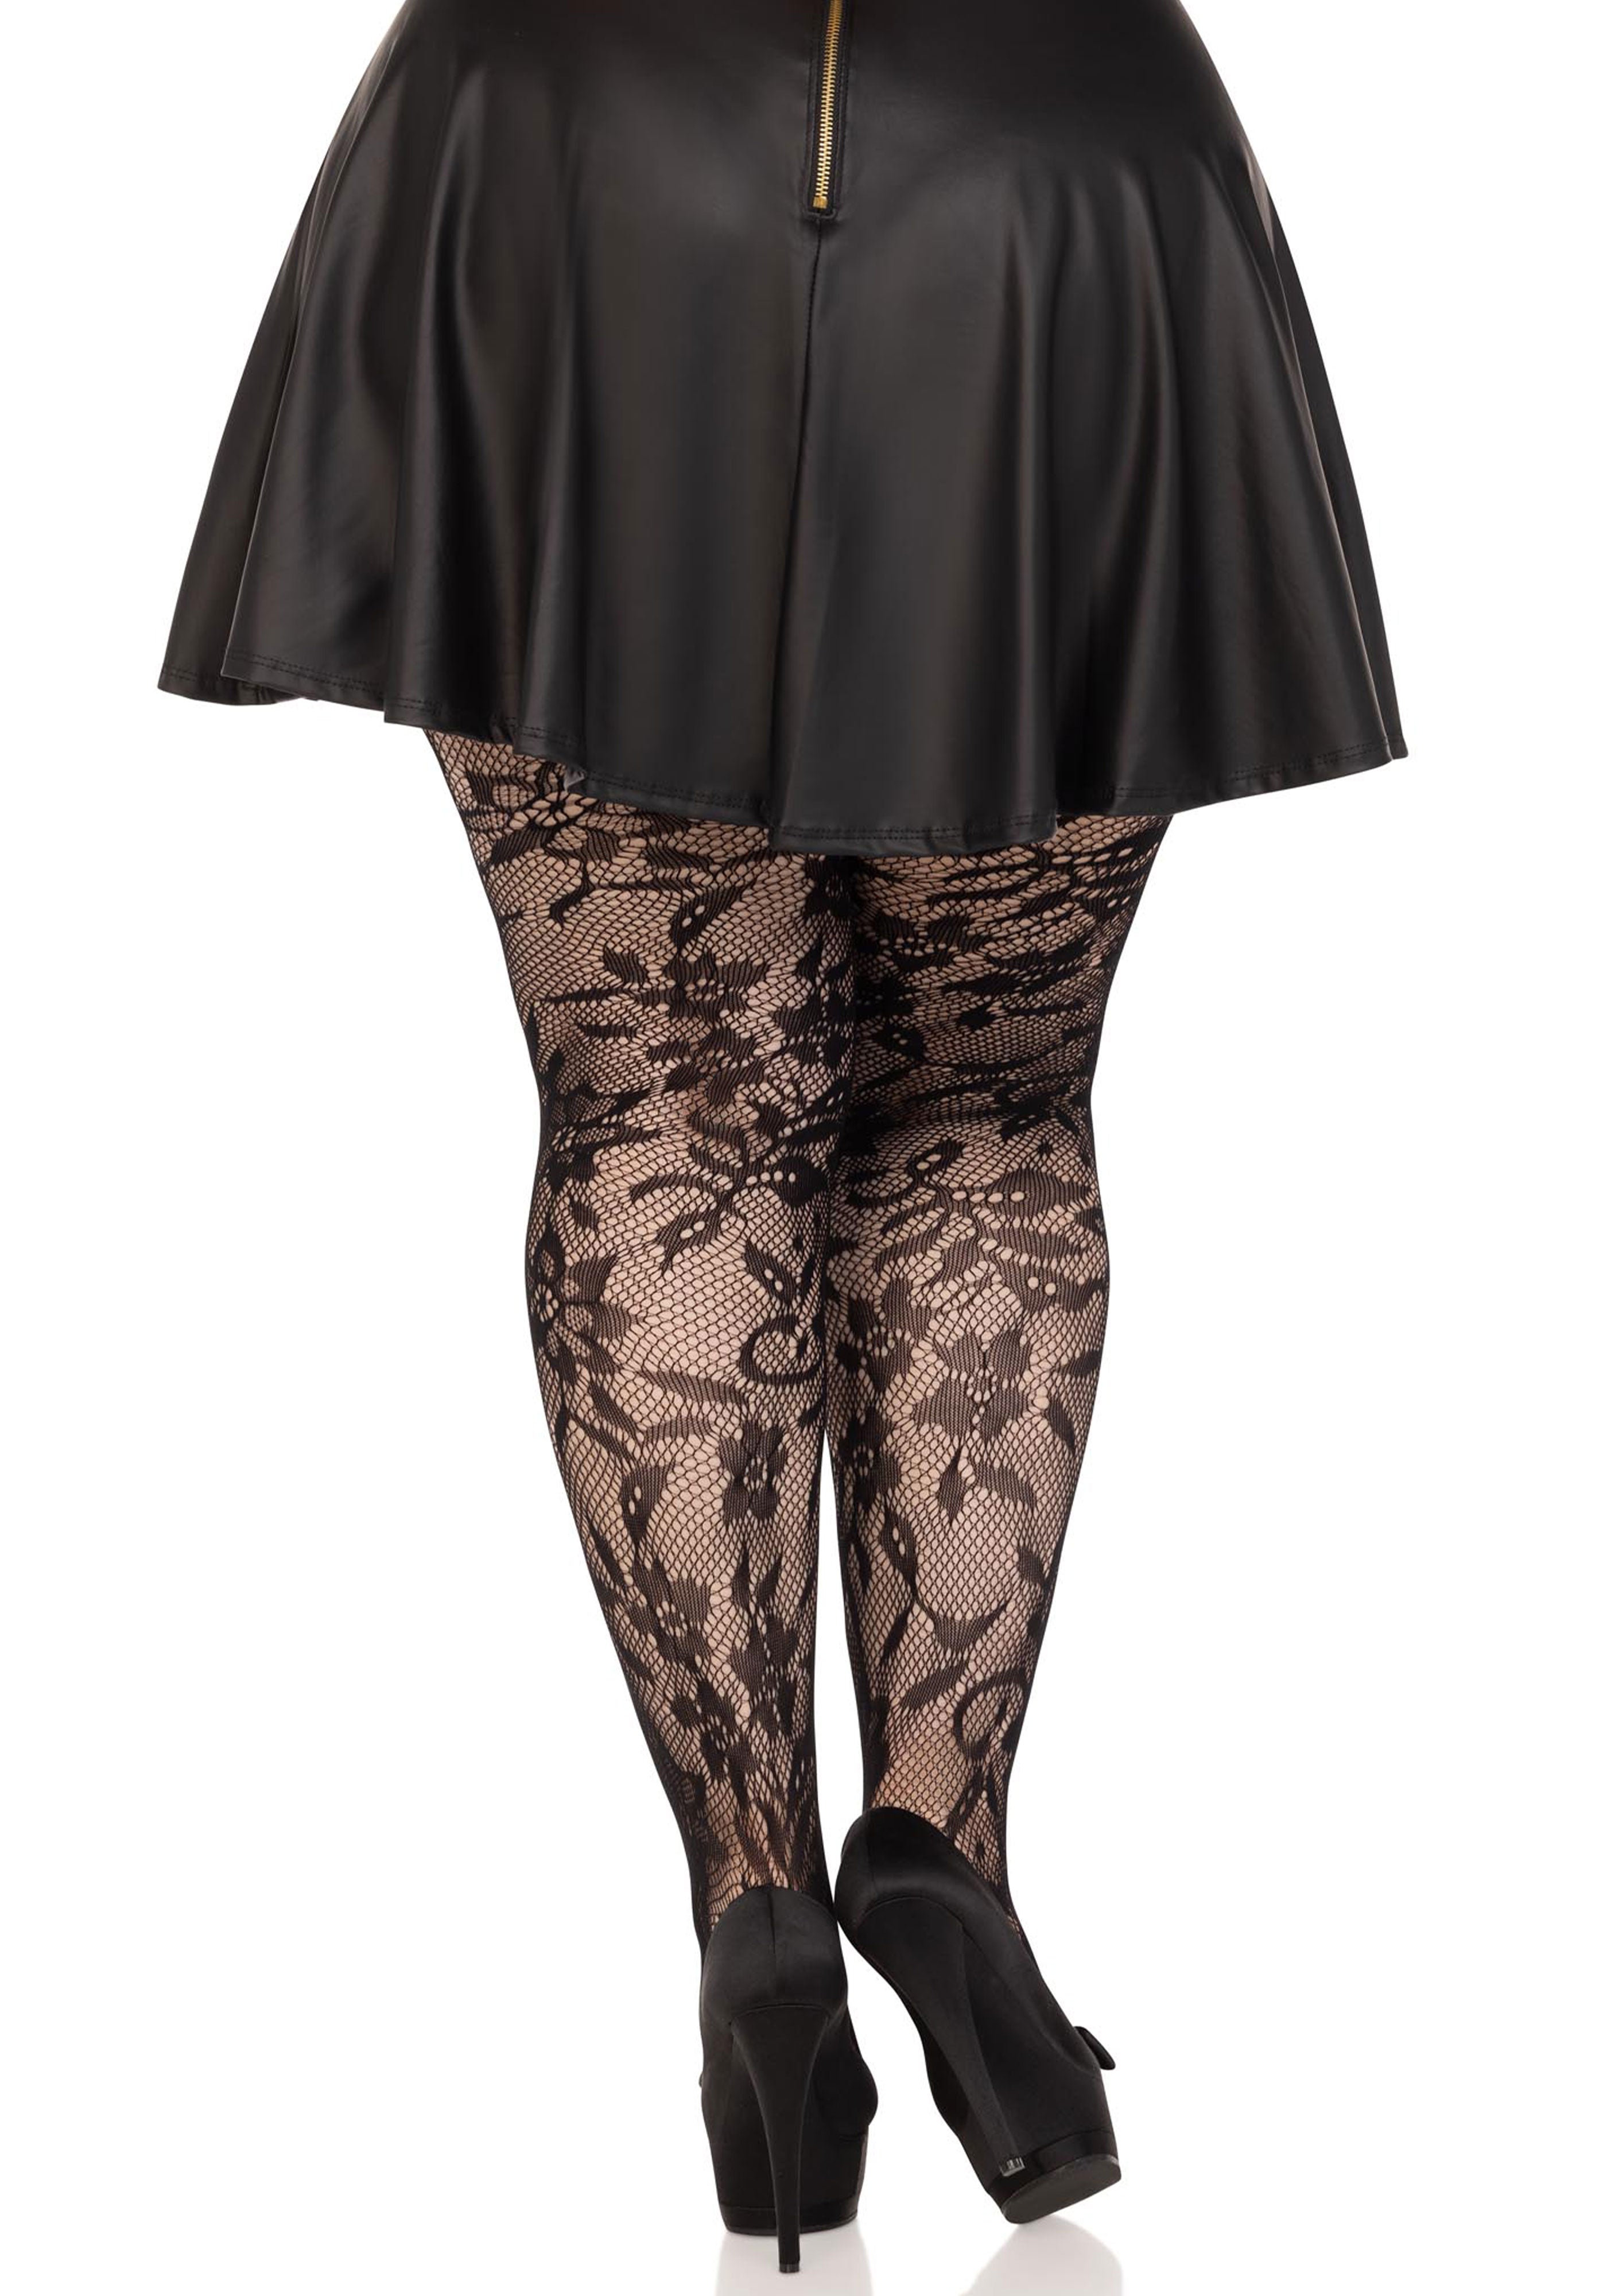 Seamless Chantilly Floral Lace Tights Plus Size